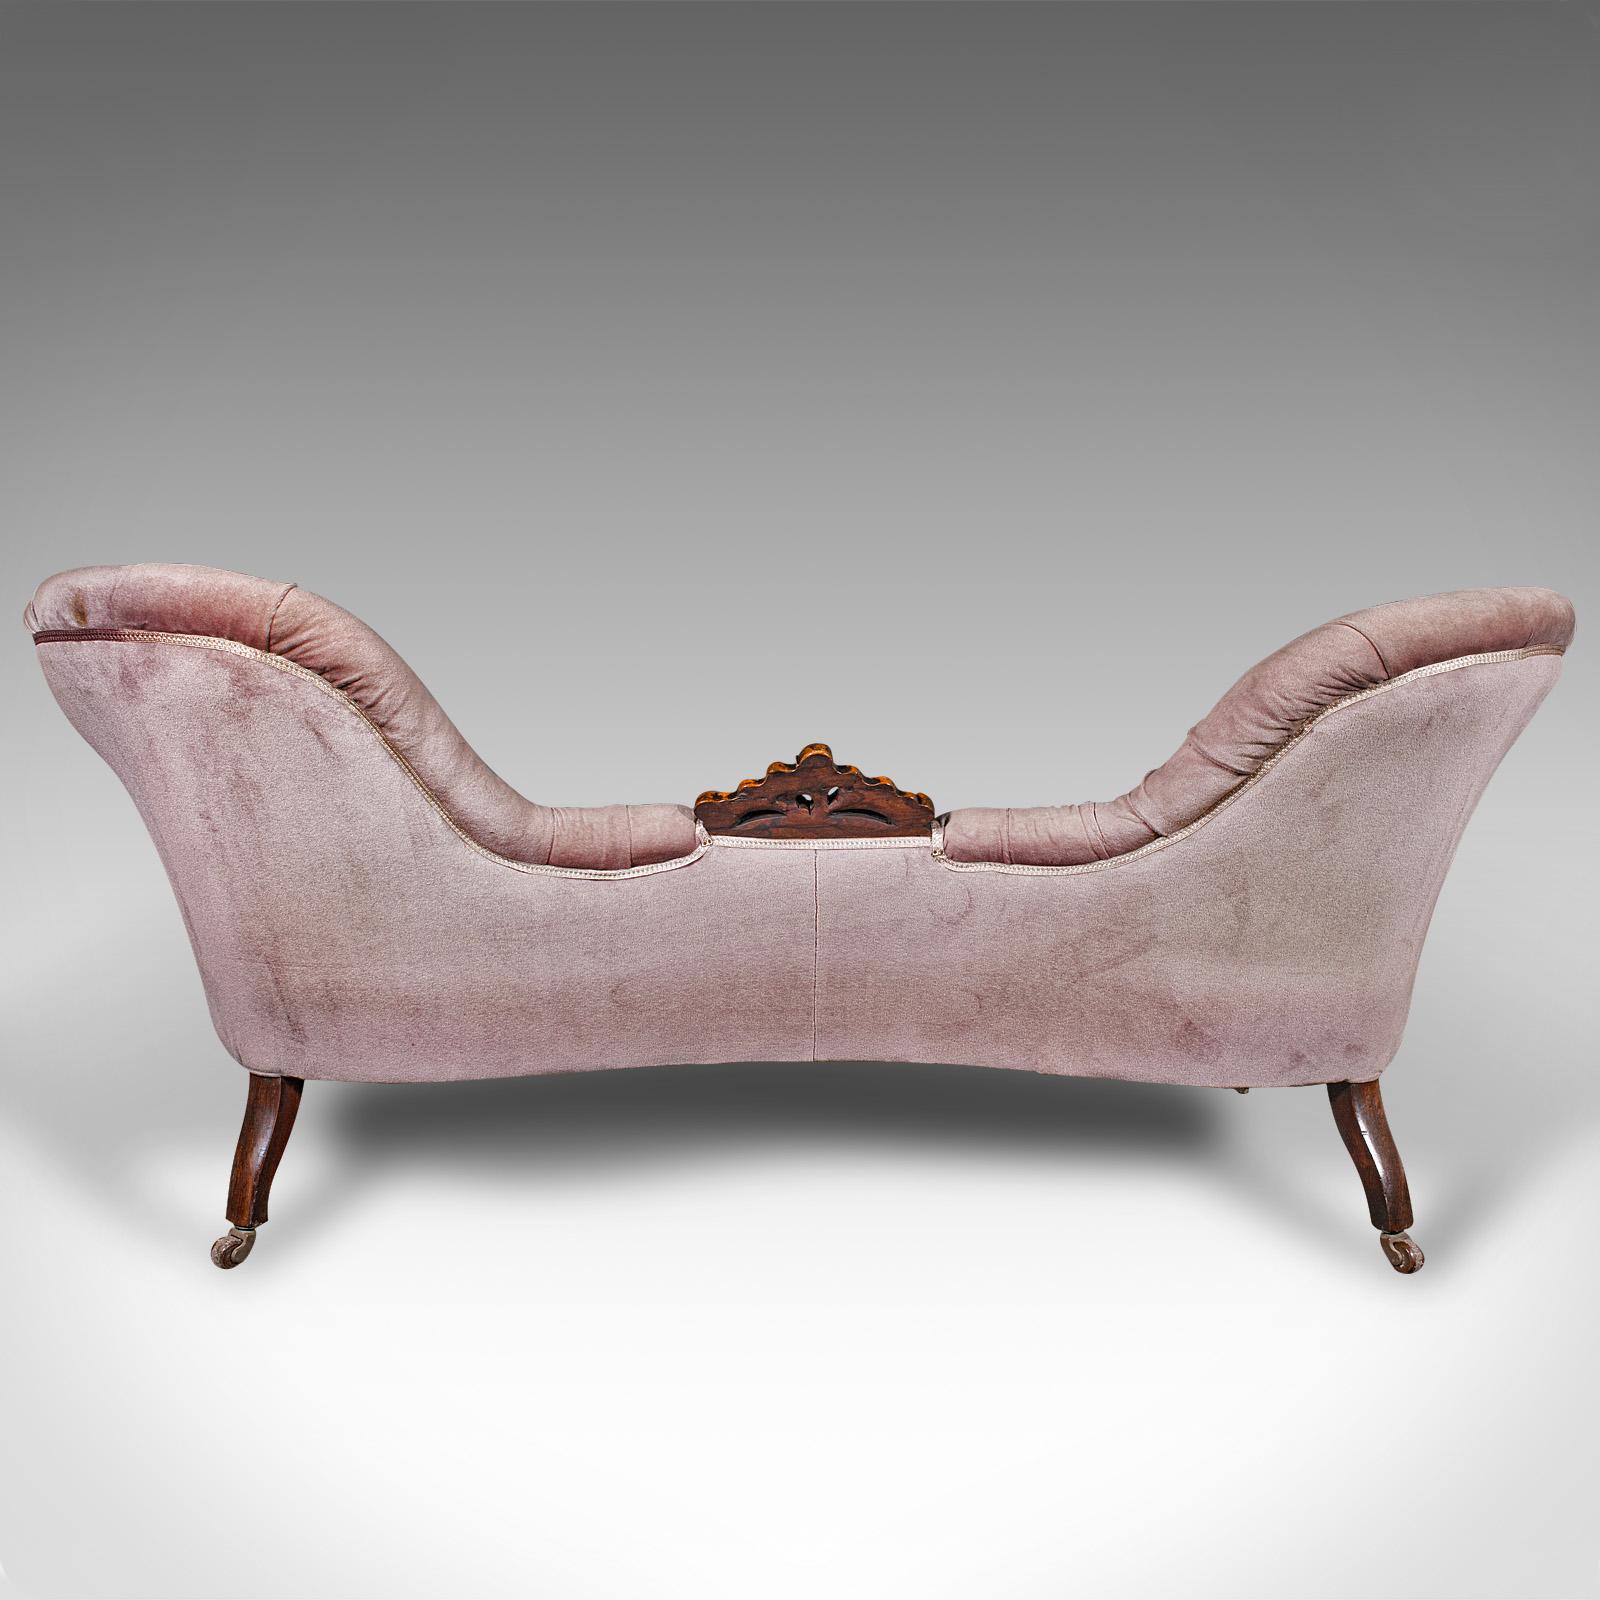 19th Century Antique Double Spoon Back Settee, English, 3 Seat, Sofa, Early Victorian, C.1840 For Sale